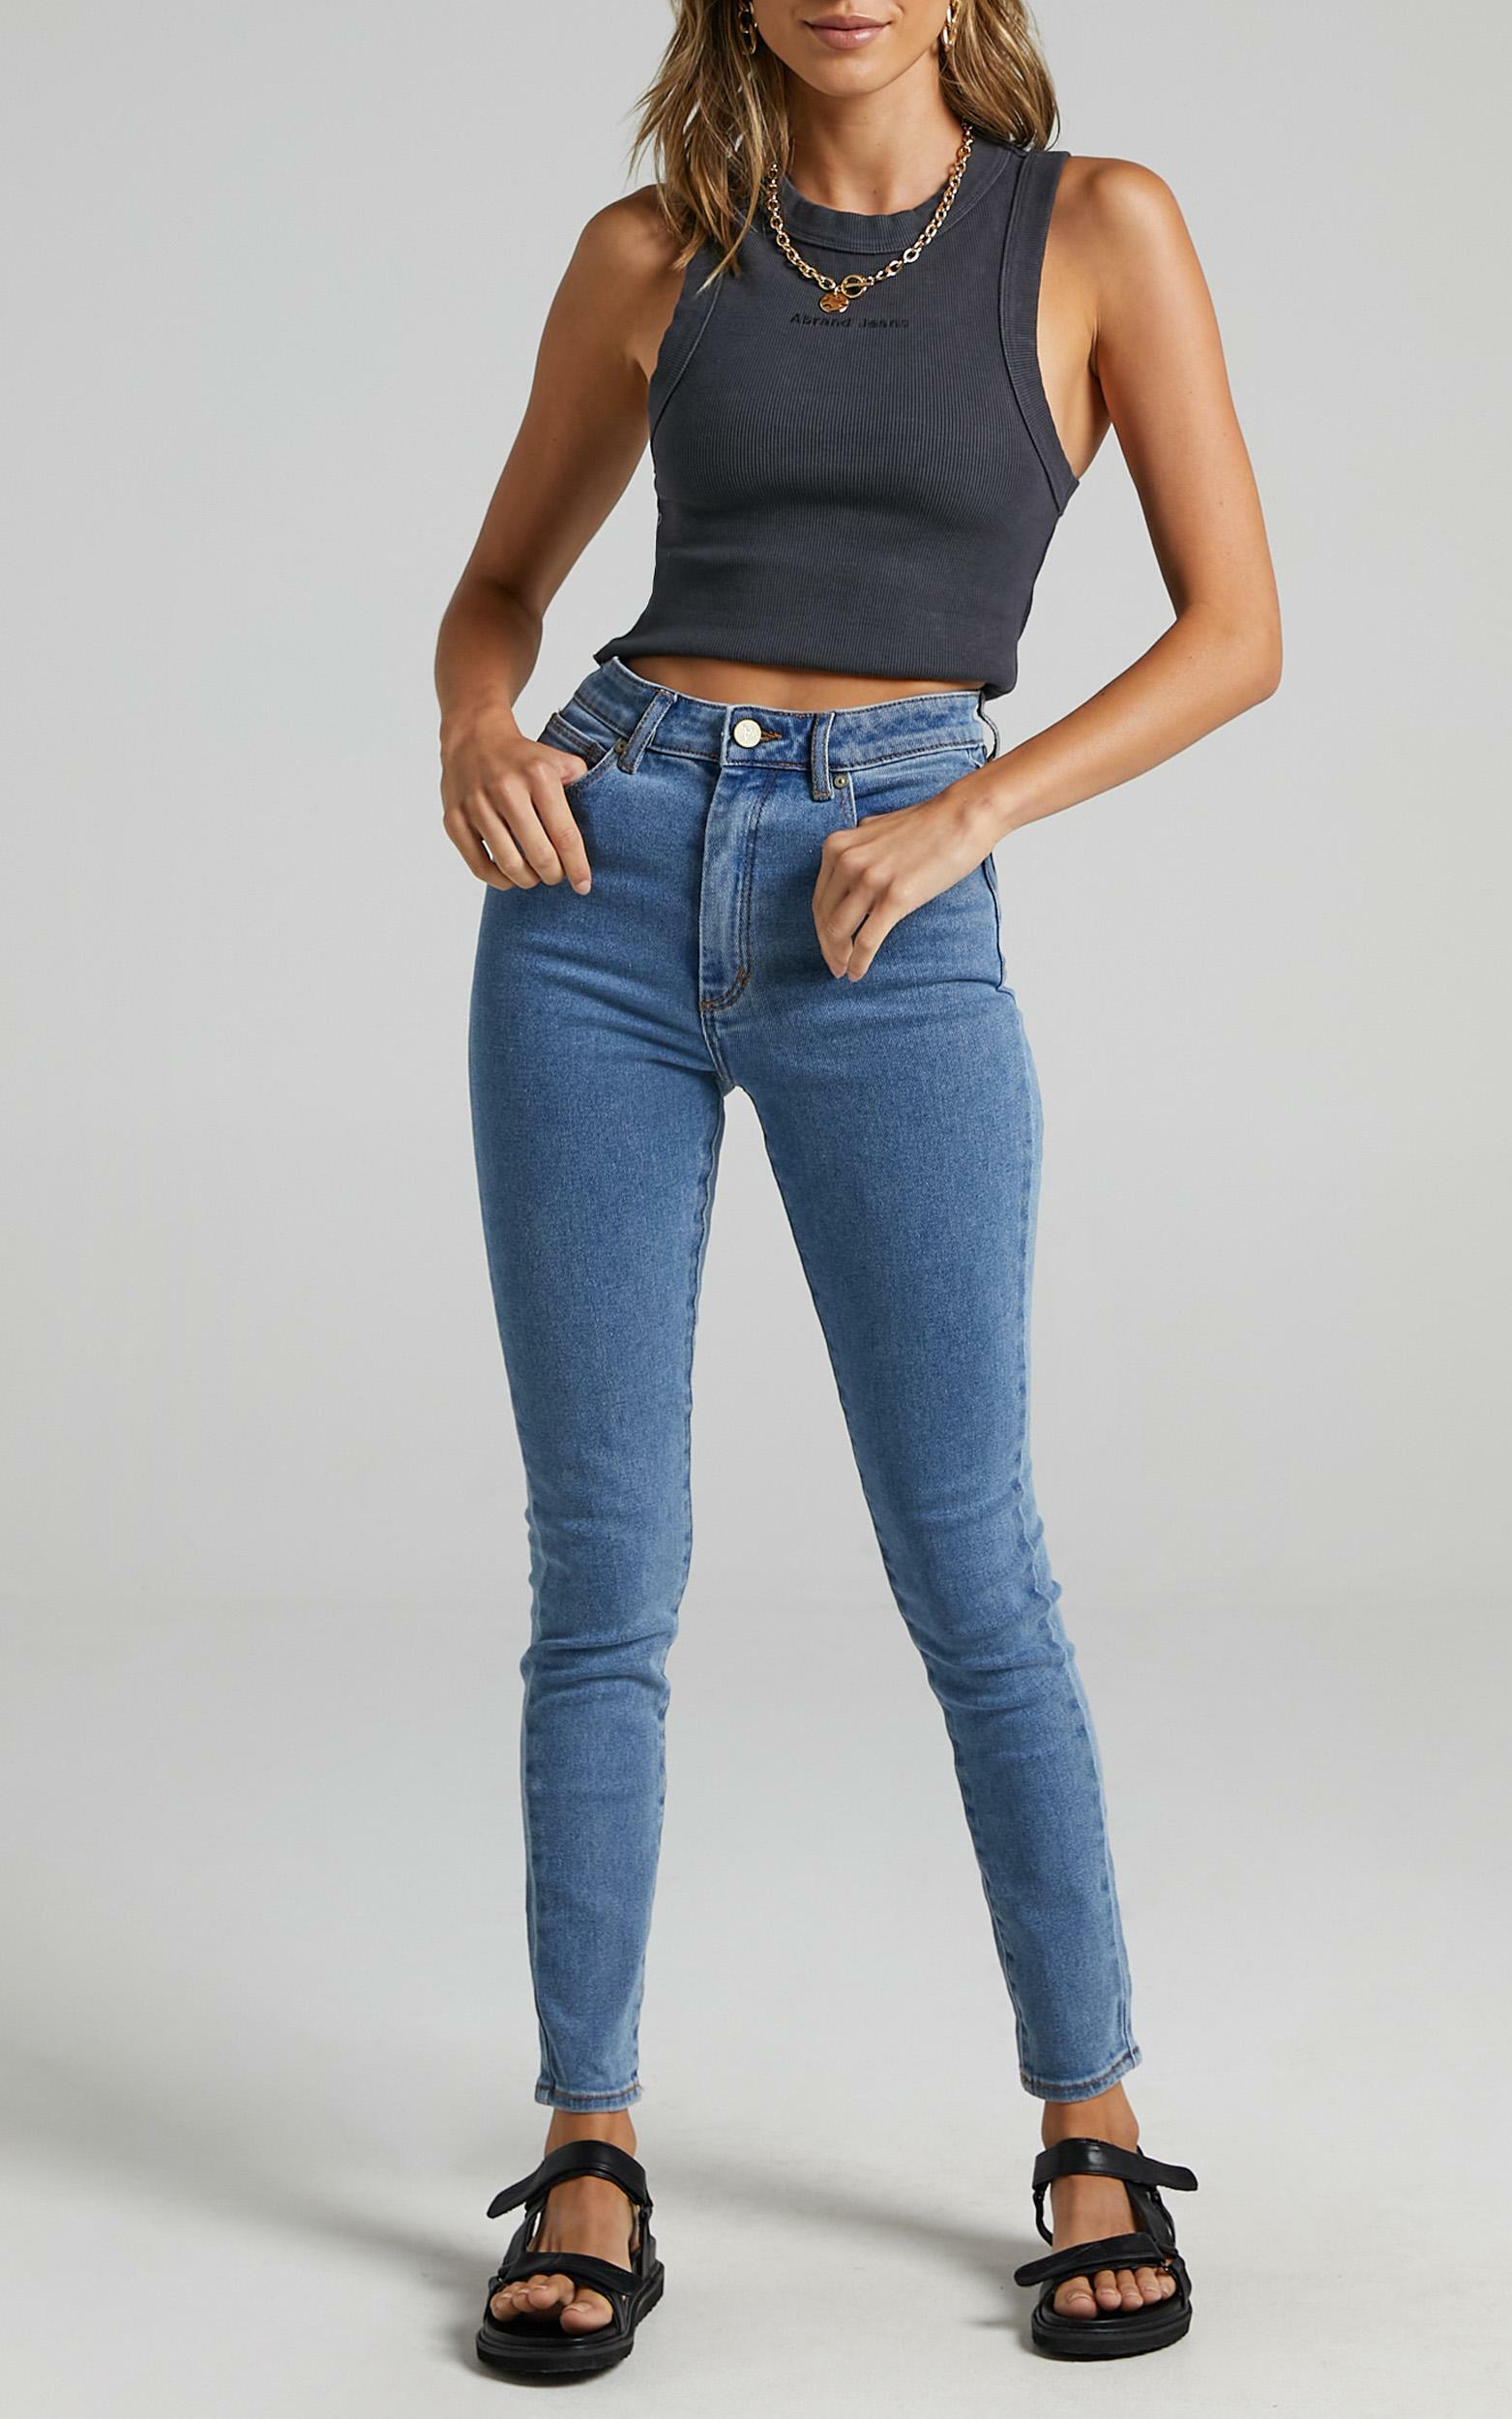 Abrand - A High Skinny Ankle Basher Jeans in La Blues - 06, BLU1, hi-res image number null